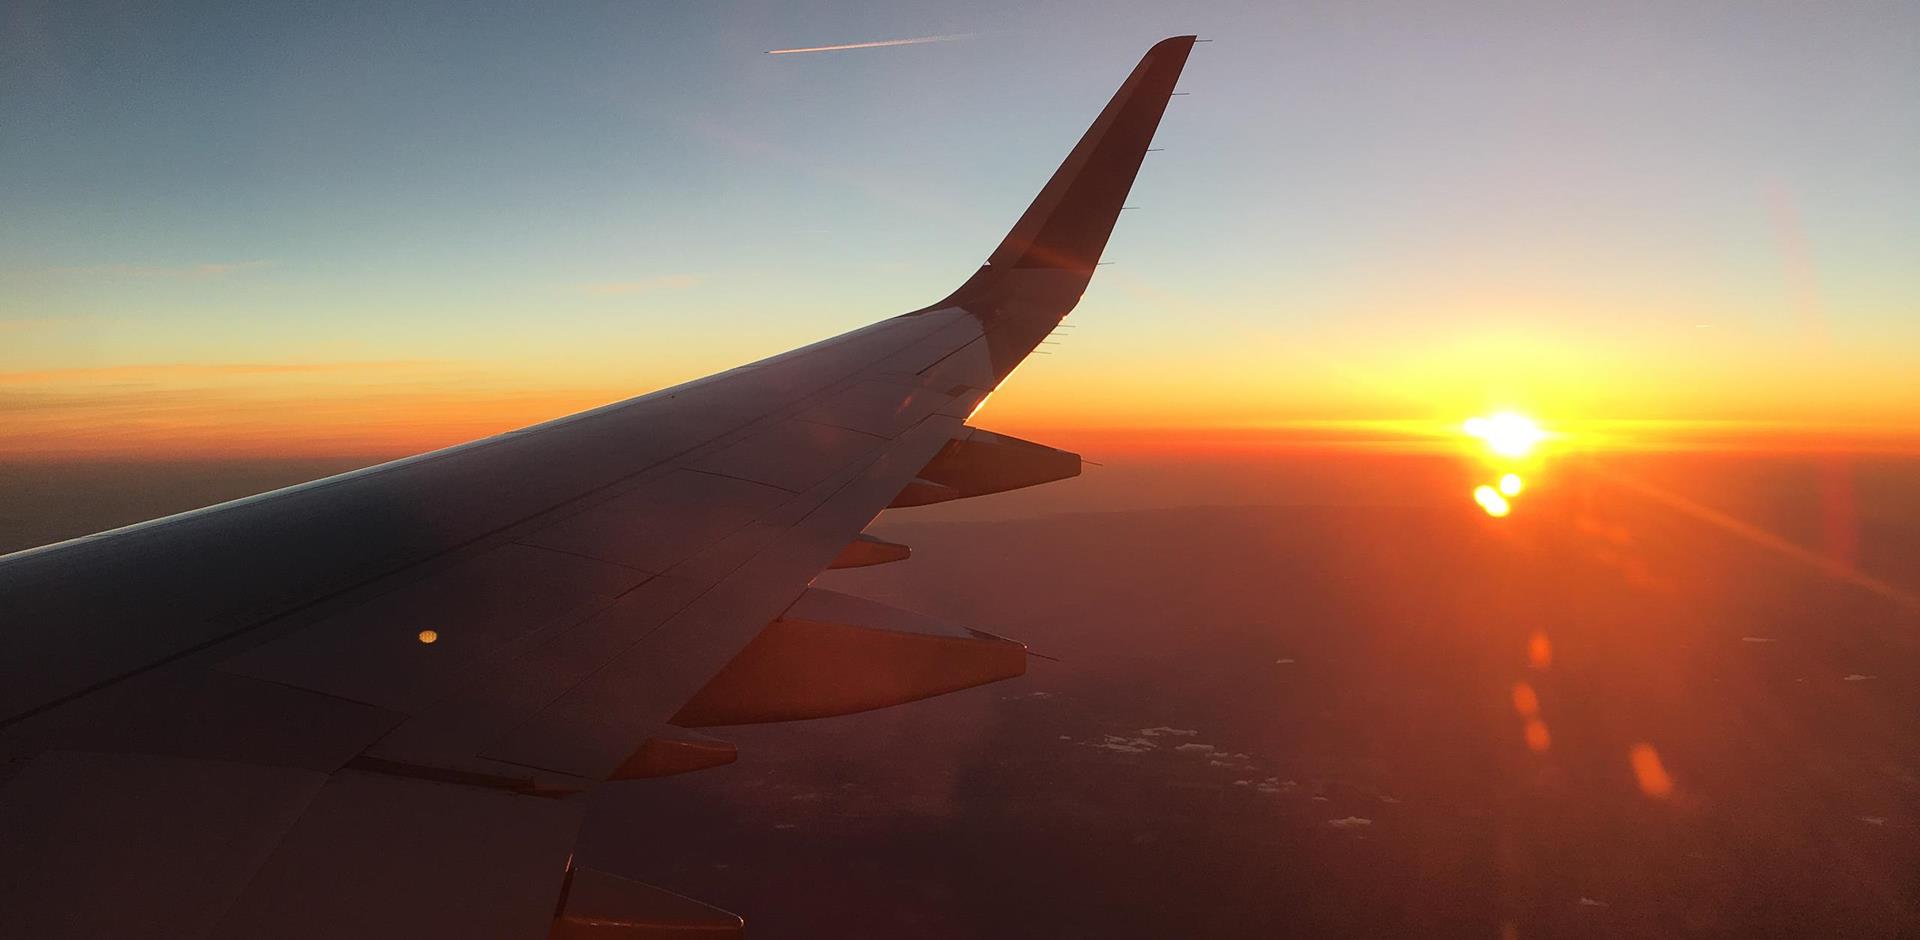 Sunset view from aircraft